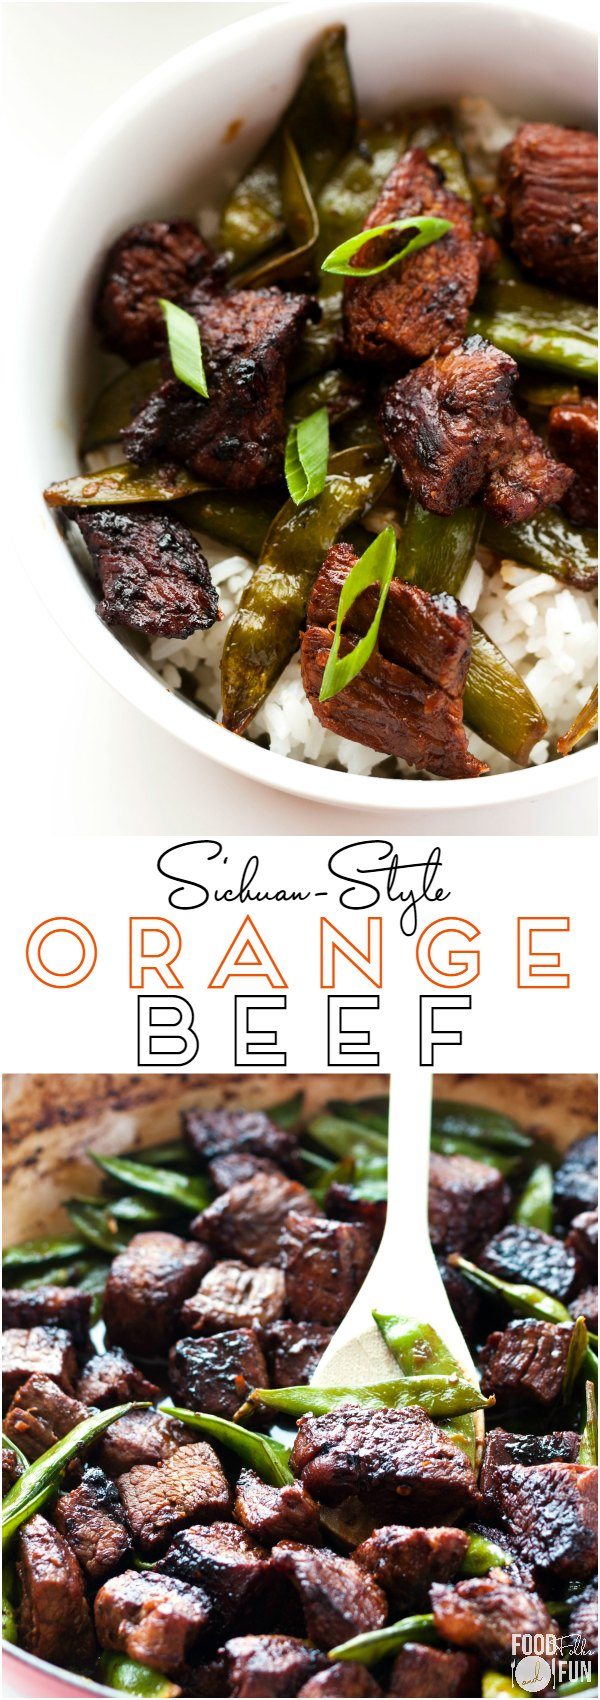 Sichuan Style Orange Beef collage with text overlay for Pinterst